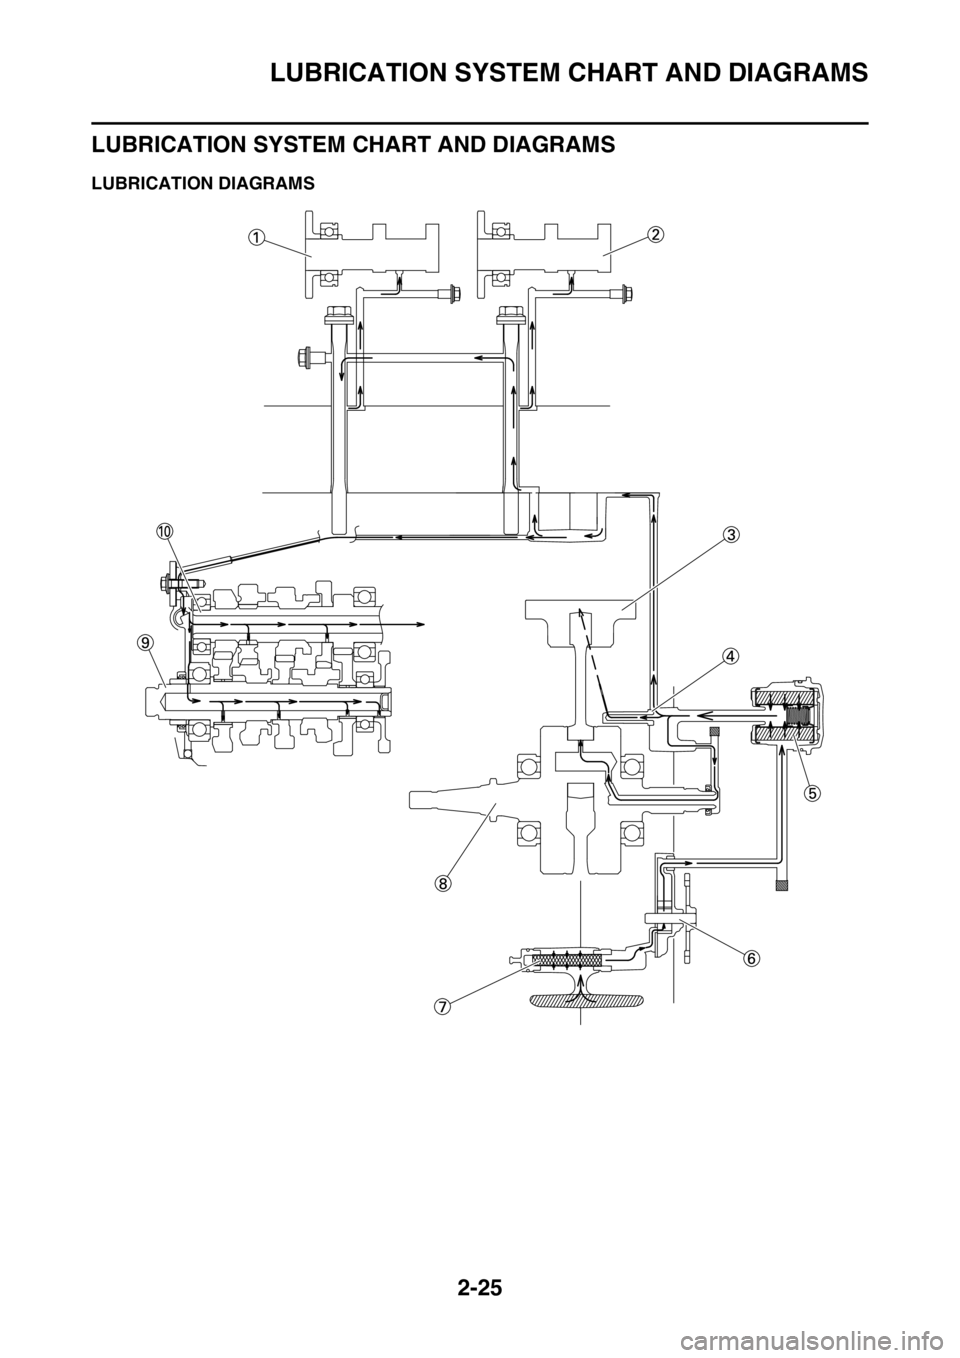 YAMAHA WR 450F 2016  Owners Manual LUBRICATION SYSTEM CHART AND DIAGRAMS
2-25
LUBRICATION SYSTEM CHART AND DIAGRAMS
EAS2GC1072LUBRICATION DIAGRAMS 